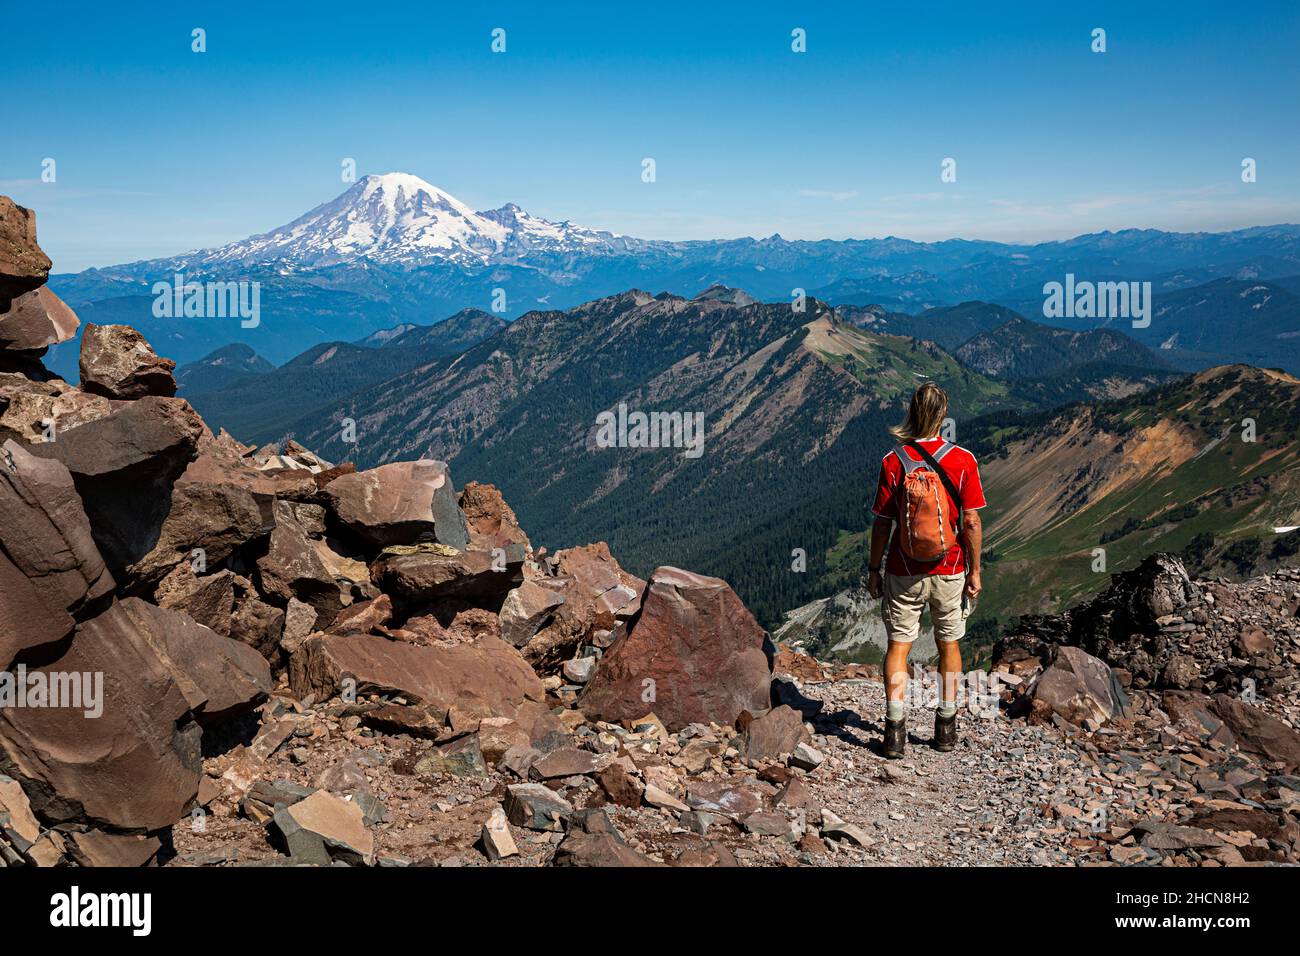 WA19949-00...WASHINGTON - Day hiker on the Alternate Pacific Crest Trail with view of Mount Rainier in the Goat Rock Wilderness. Stock Photo